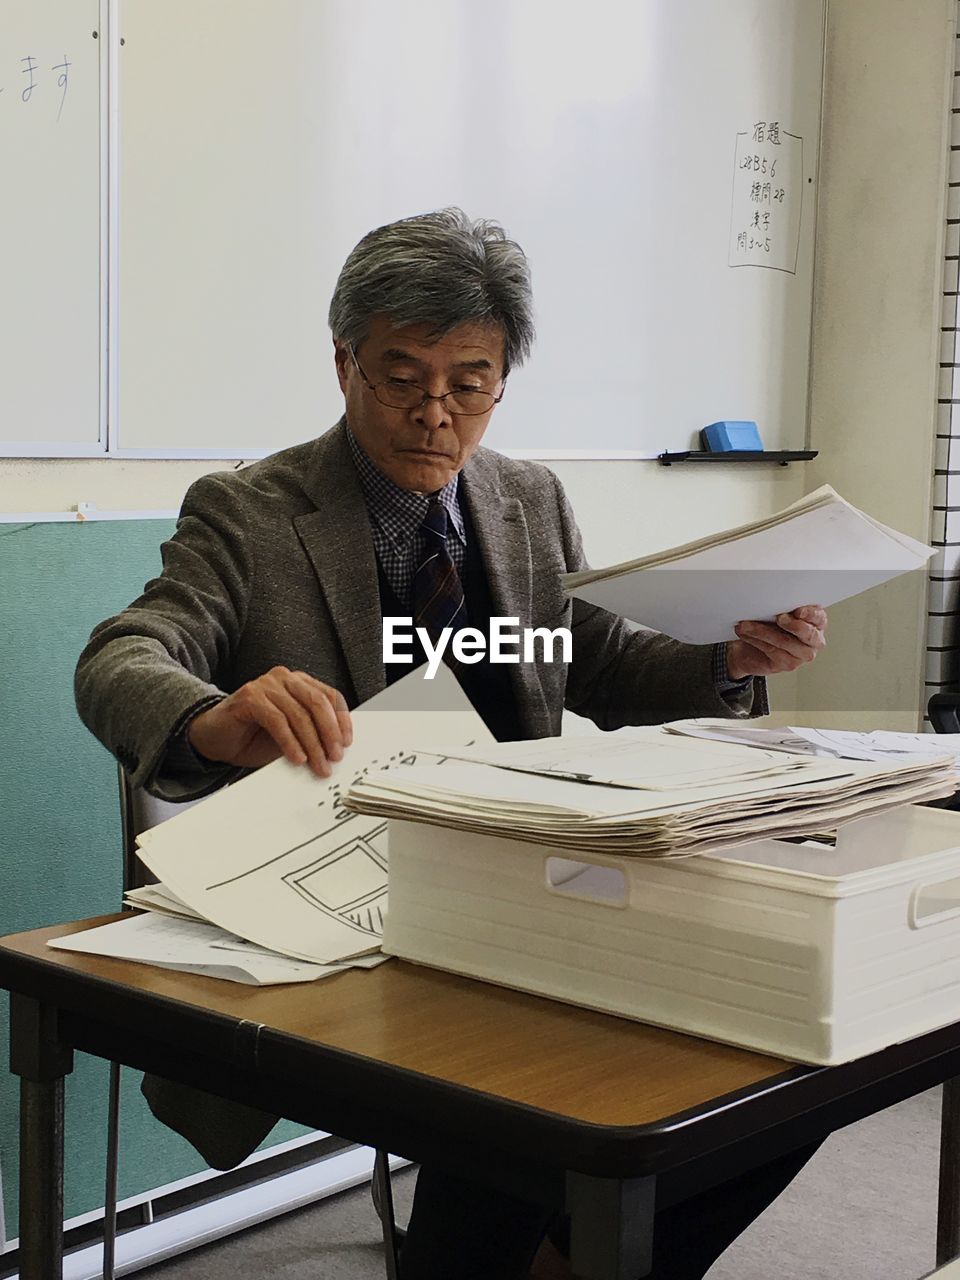 Professor with papers on desk sitting in classroom